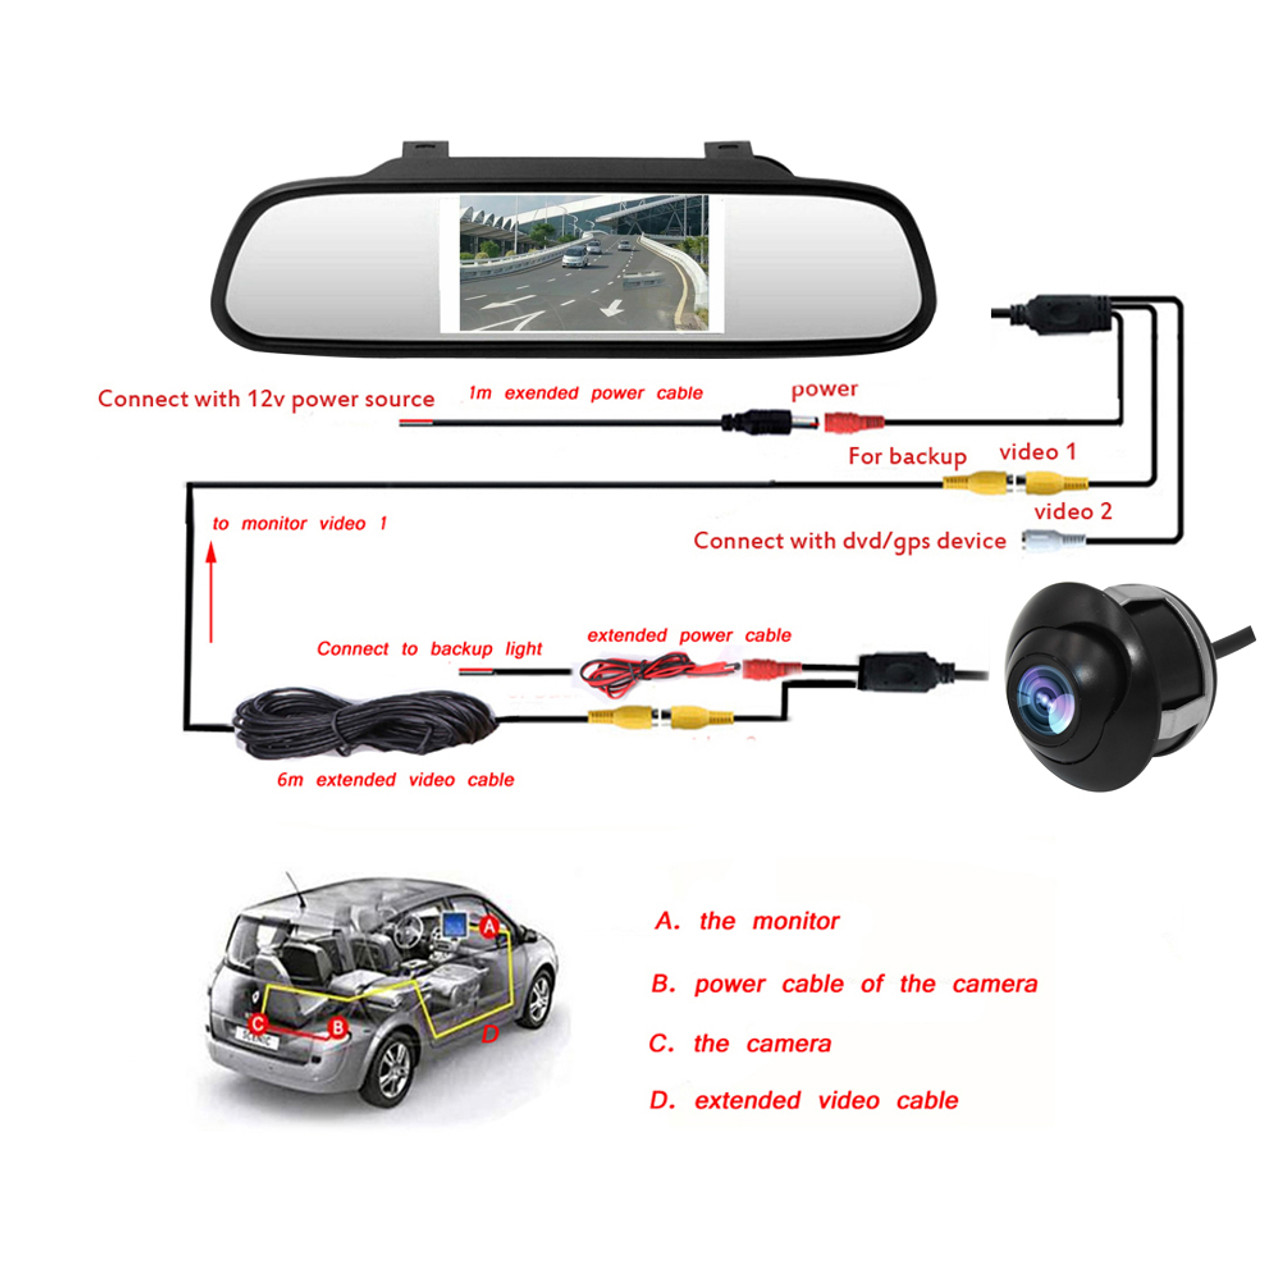 HD Reverse Car Camera + 4.3" Mirror Monitor Kit Vehicle Security System